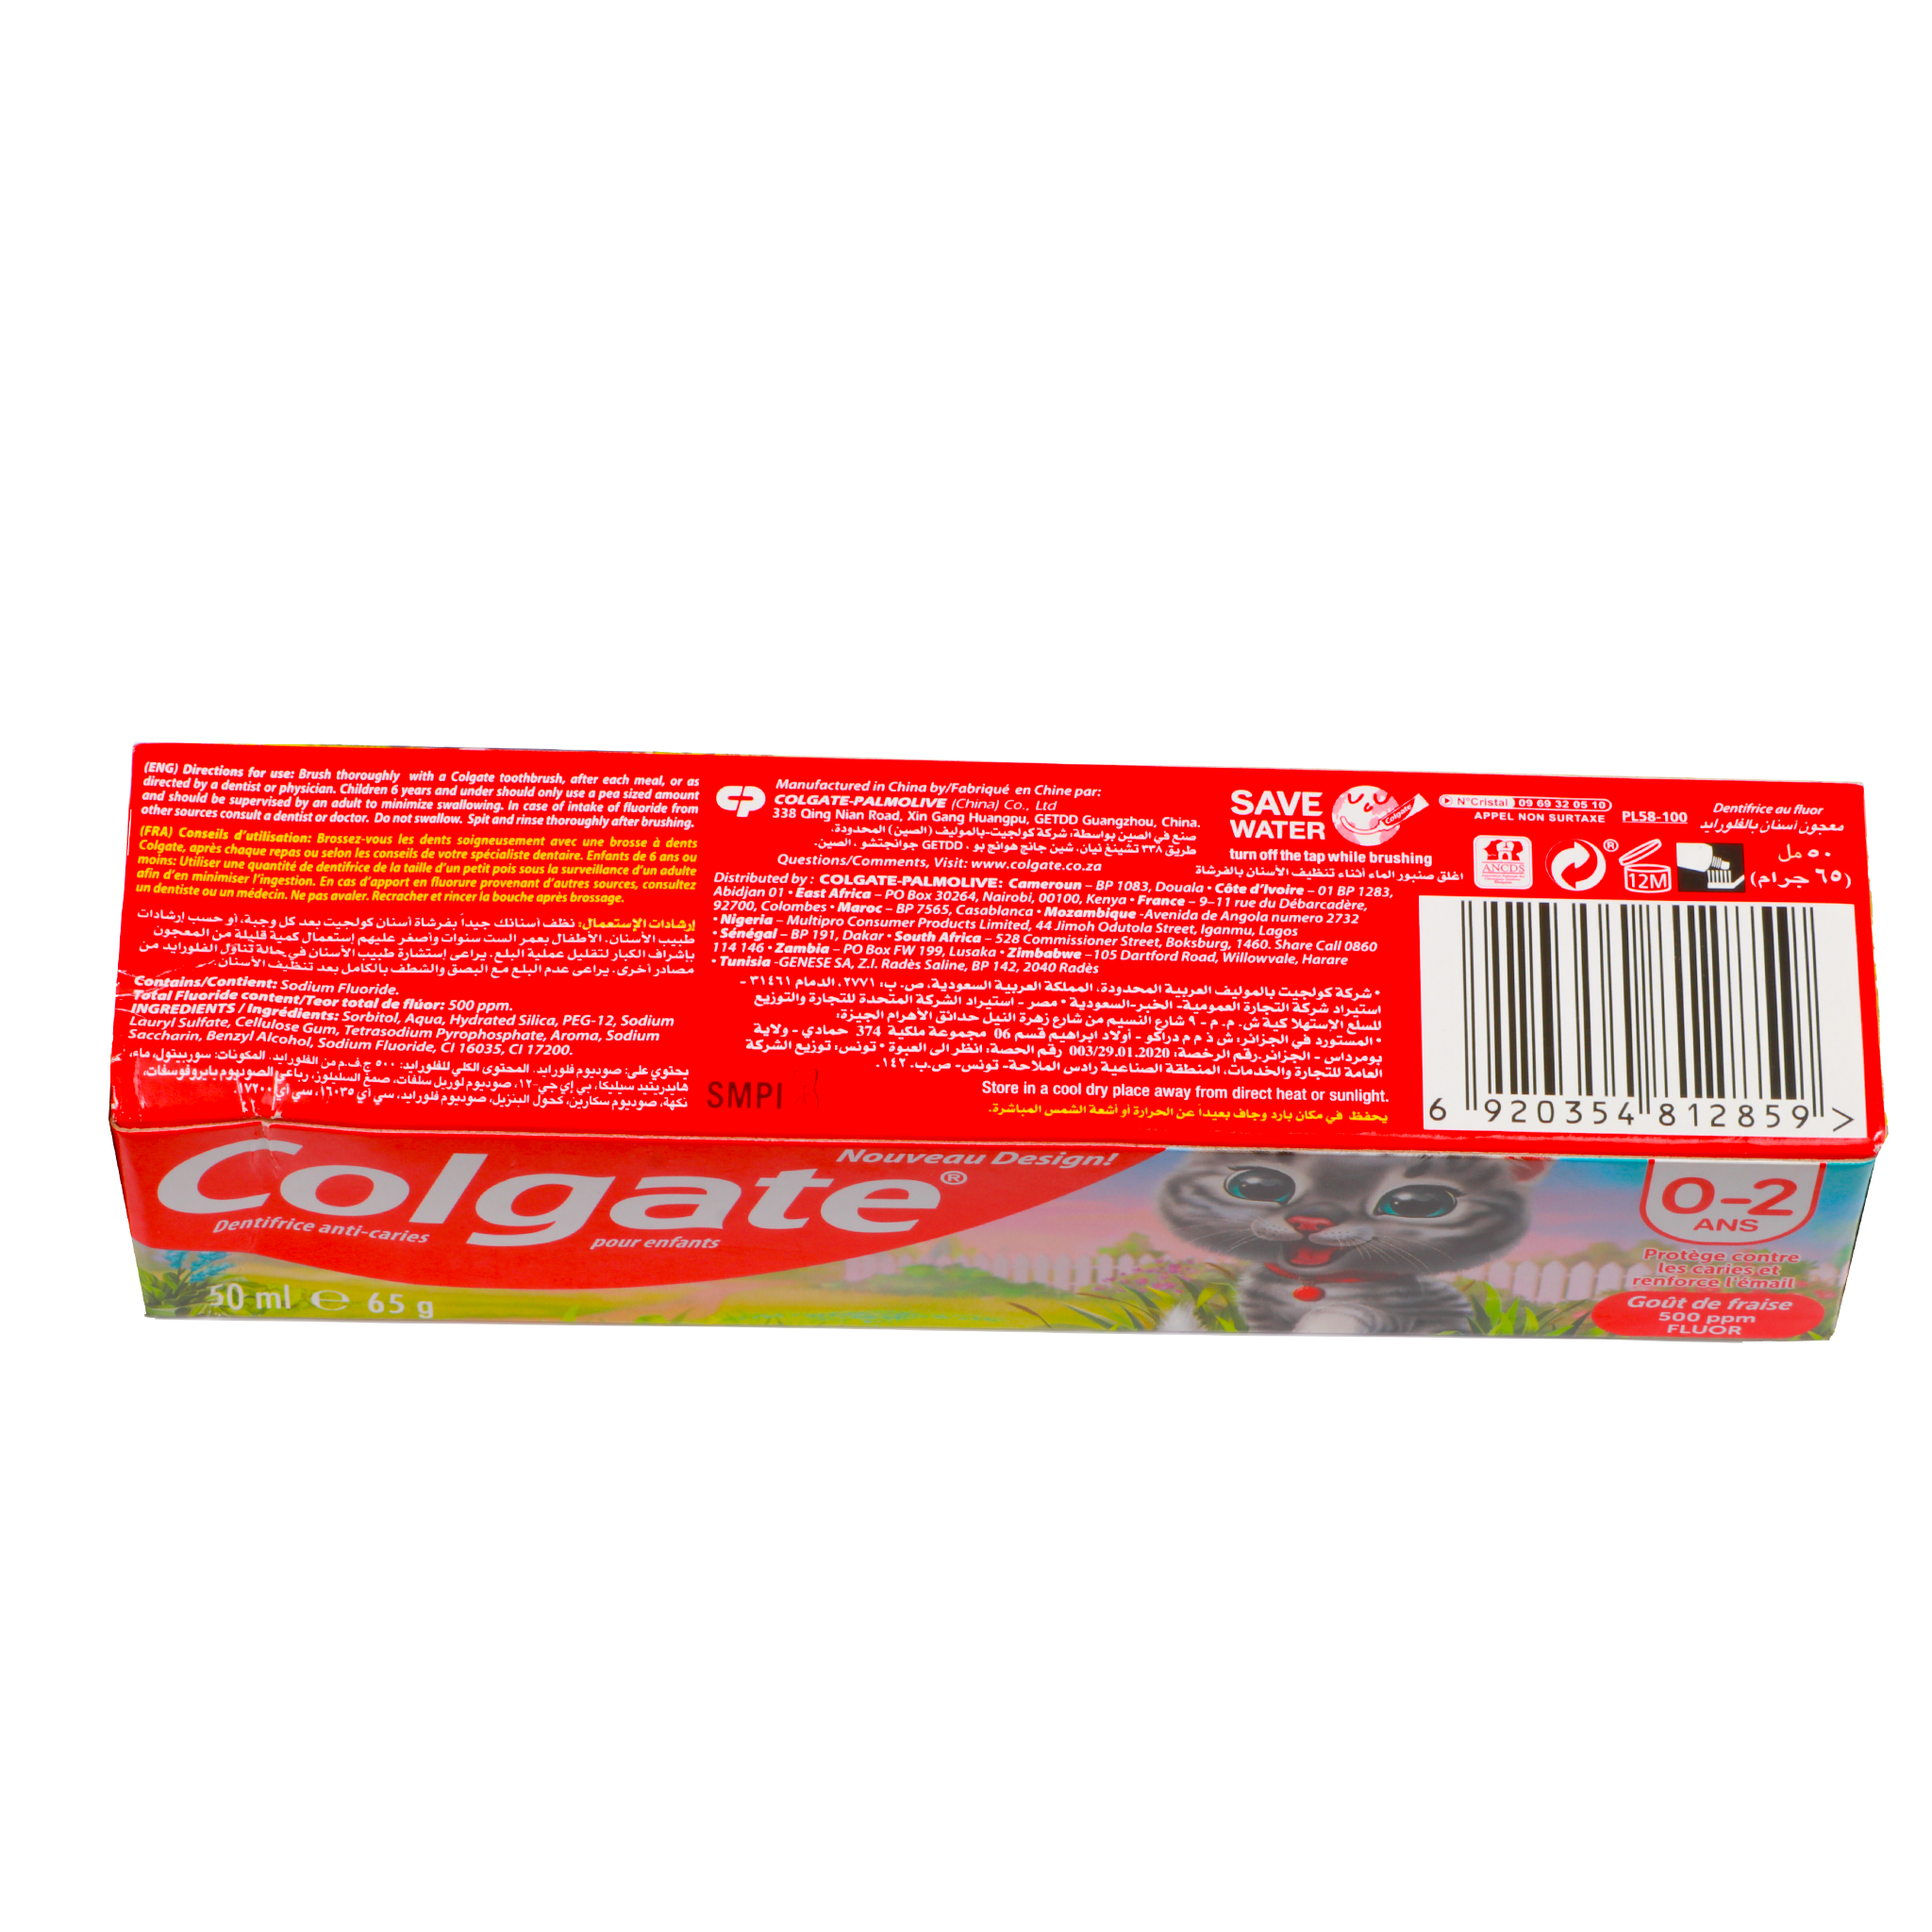 Colgate ToothPasta For Kids 0-2Y 50Ml